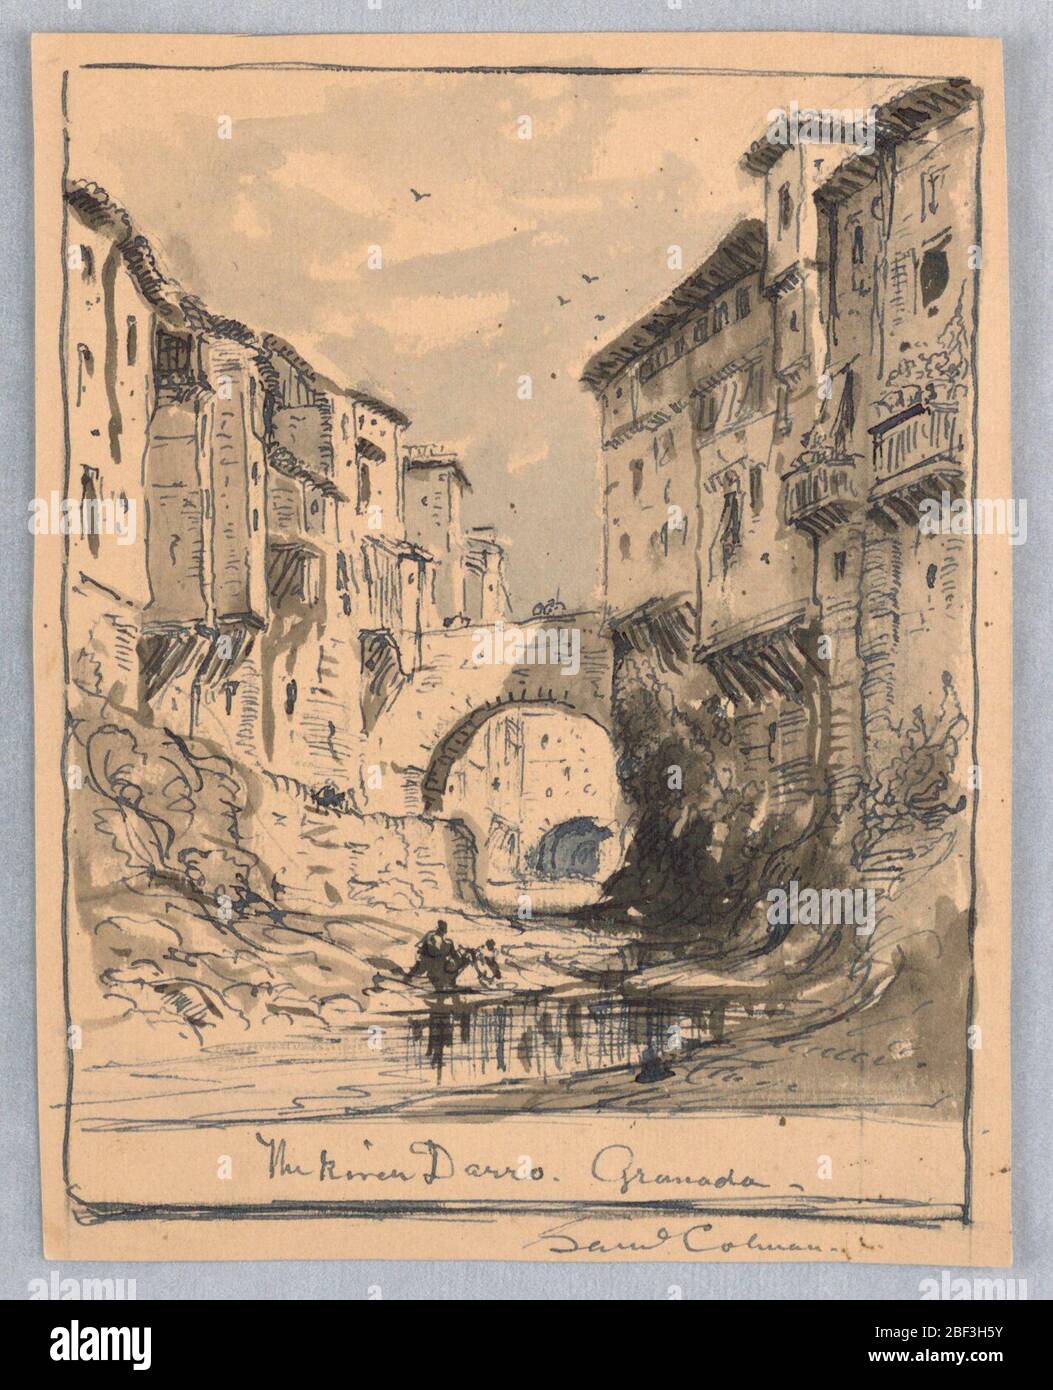 The River Darro Granada. Verticle rectangle. Water and two figures in foreground. Backs of houses and porches on both sides of the stream. A bridge over the water and other bridges beyond. Stock Photo